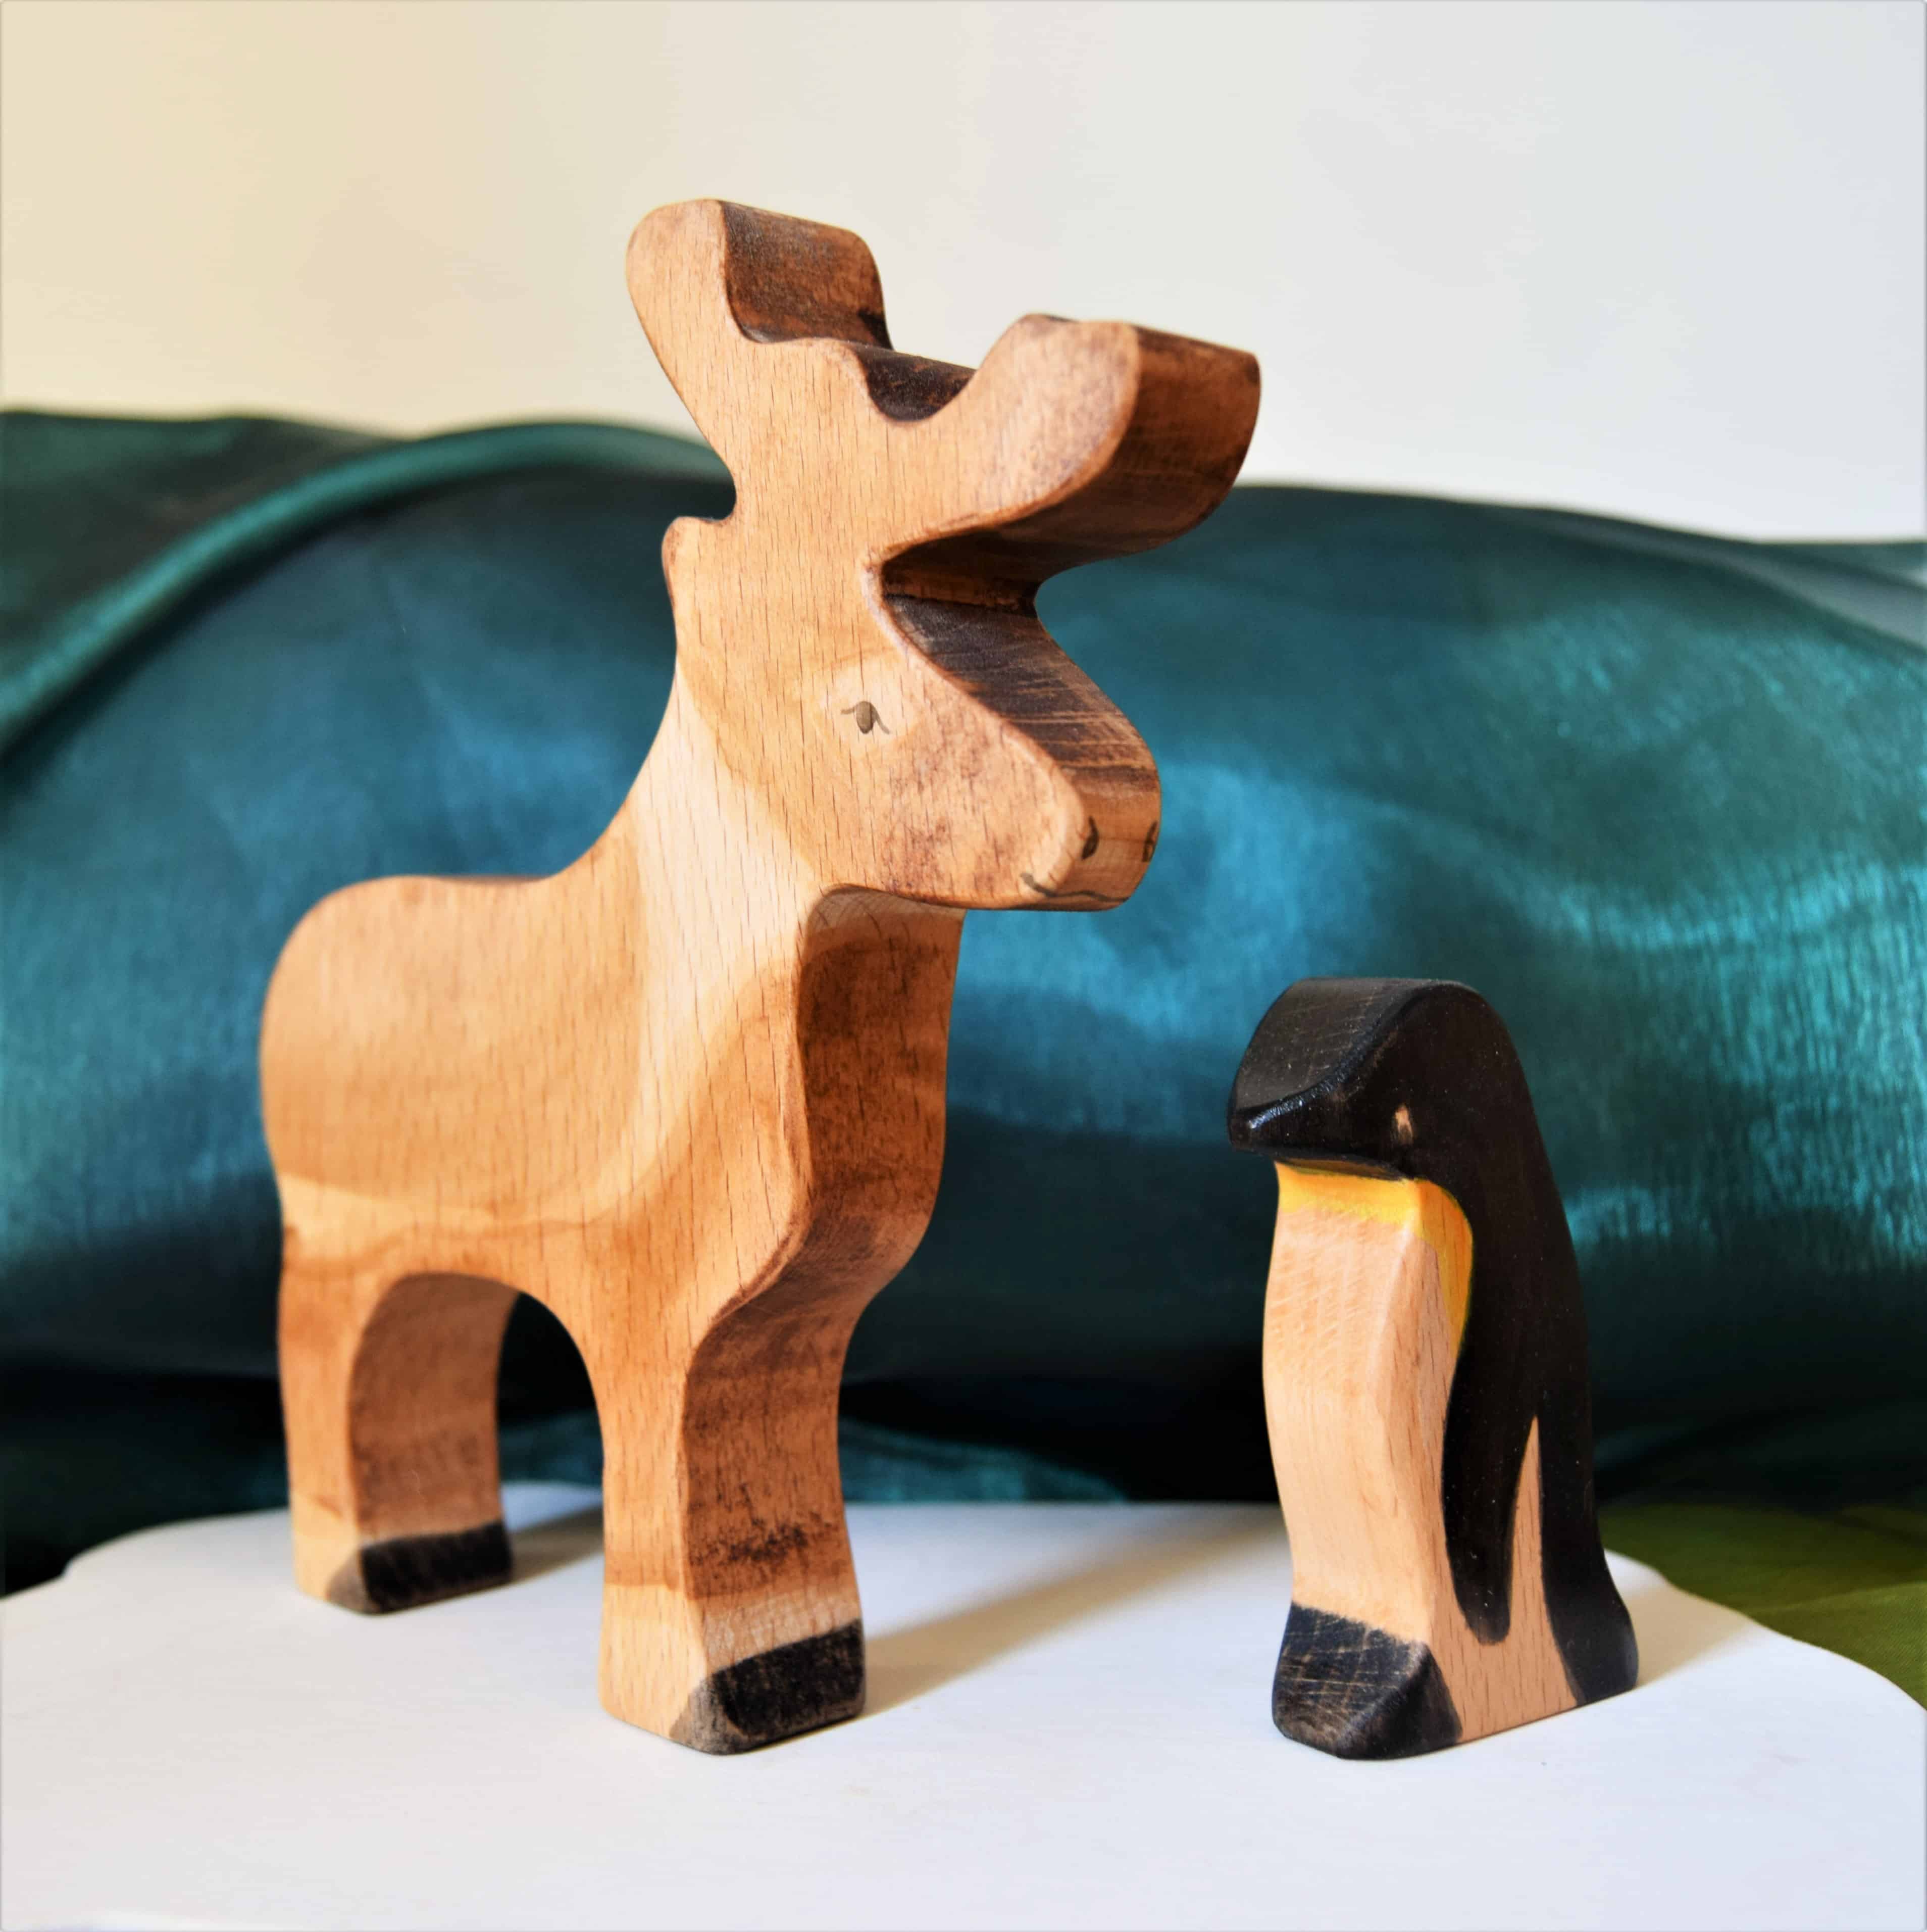 meet the mum behind the maker - busy busy learning - eric and albert's crafts - handmade - handcrafted - UK made - wooden toys - wooden animals